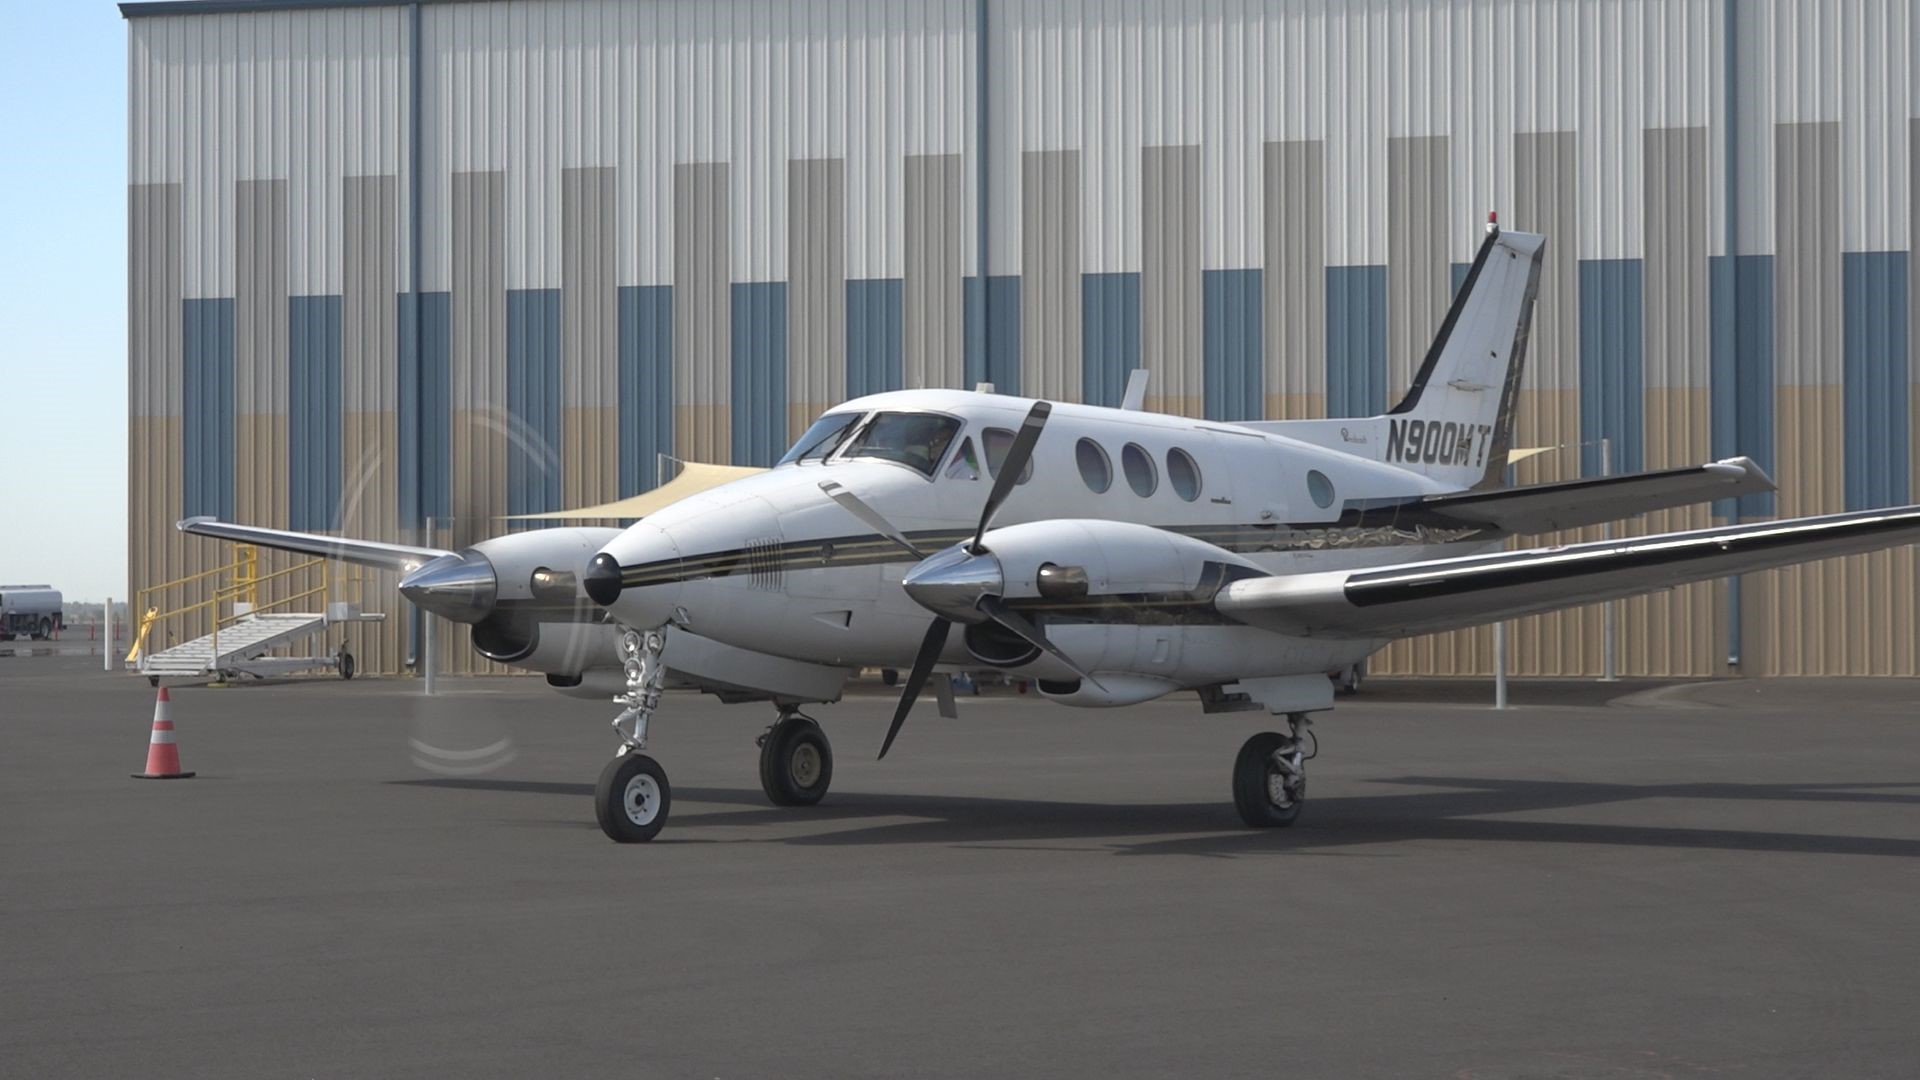 A spacious, two propeller Beechcraft 900 MT will have room to fly eight passengers from Mather Airport to two Bay Area airports starting this fall.